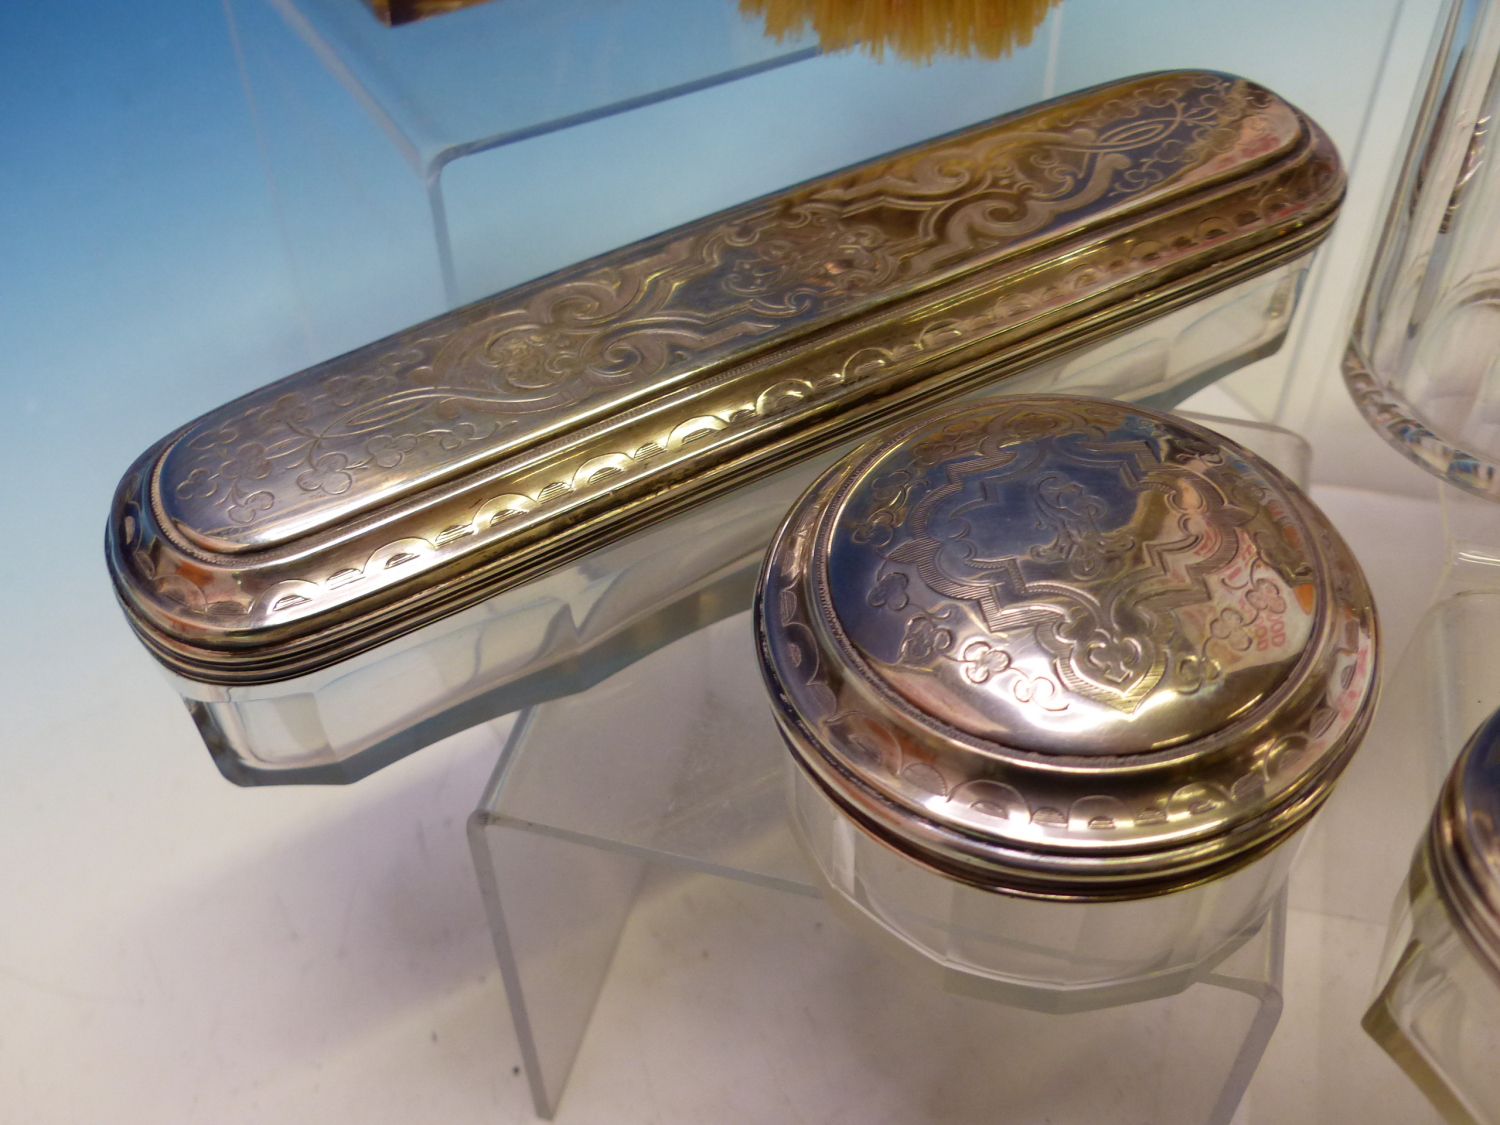 FROM THE ESTATE OF DAME ALICIA MARKOVA, A LATE 19th C. RUSSIAN SILVER EIGHT PIECE DRESSING TABLE - Image 5 of 6